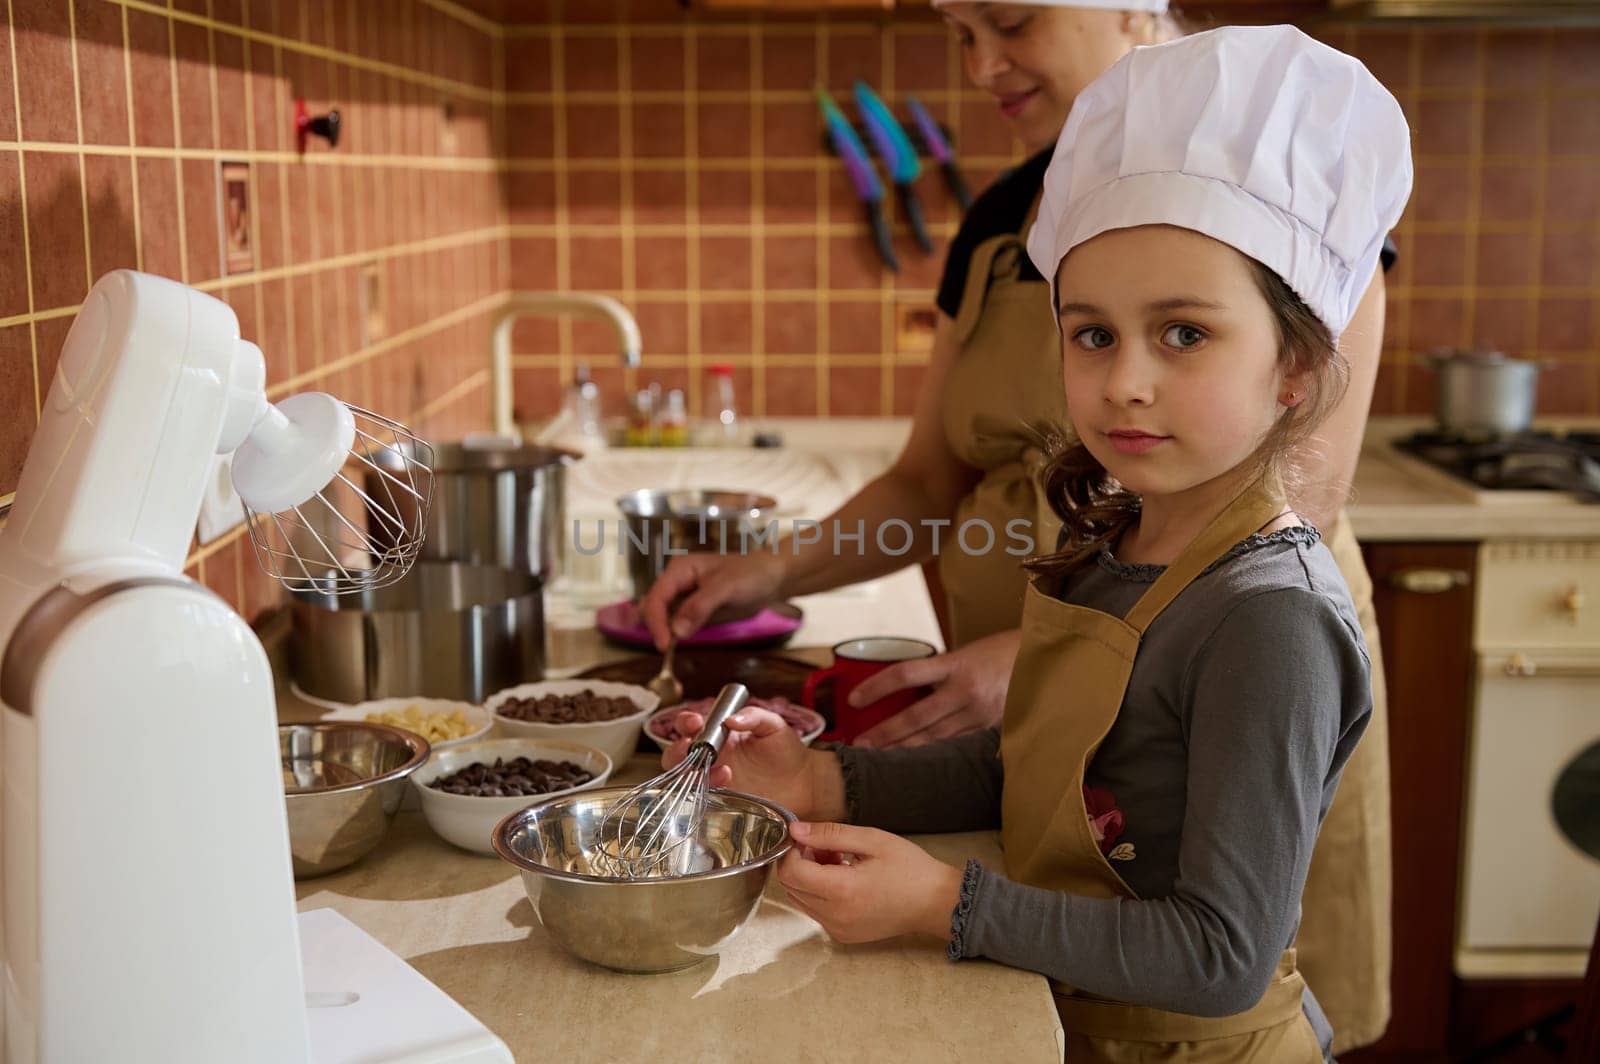 Portrait of a beautiful kid girl in white chef's hat and beige apron standing by kitchen counter, helping her mother, mixing whipped cream with melted chocolate using a whisk, looking at the camera